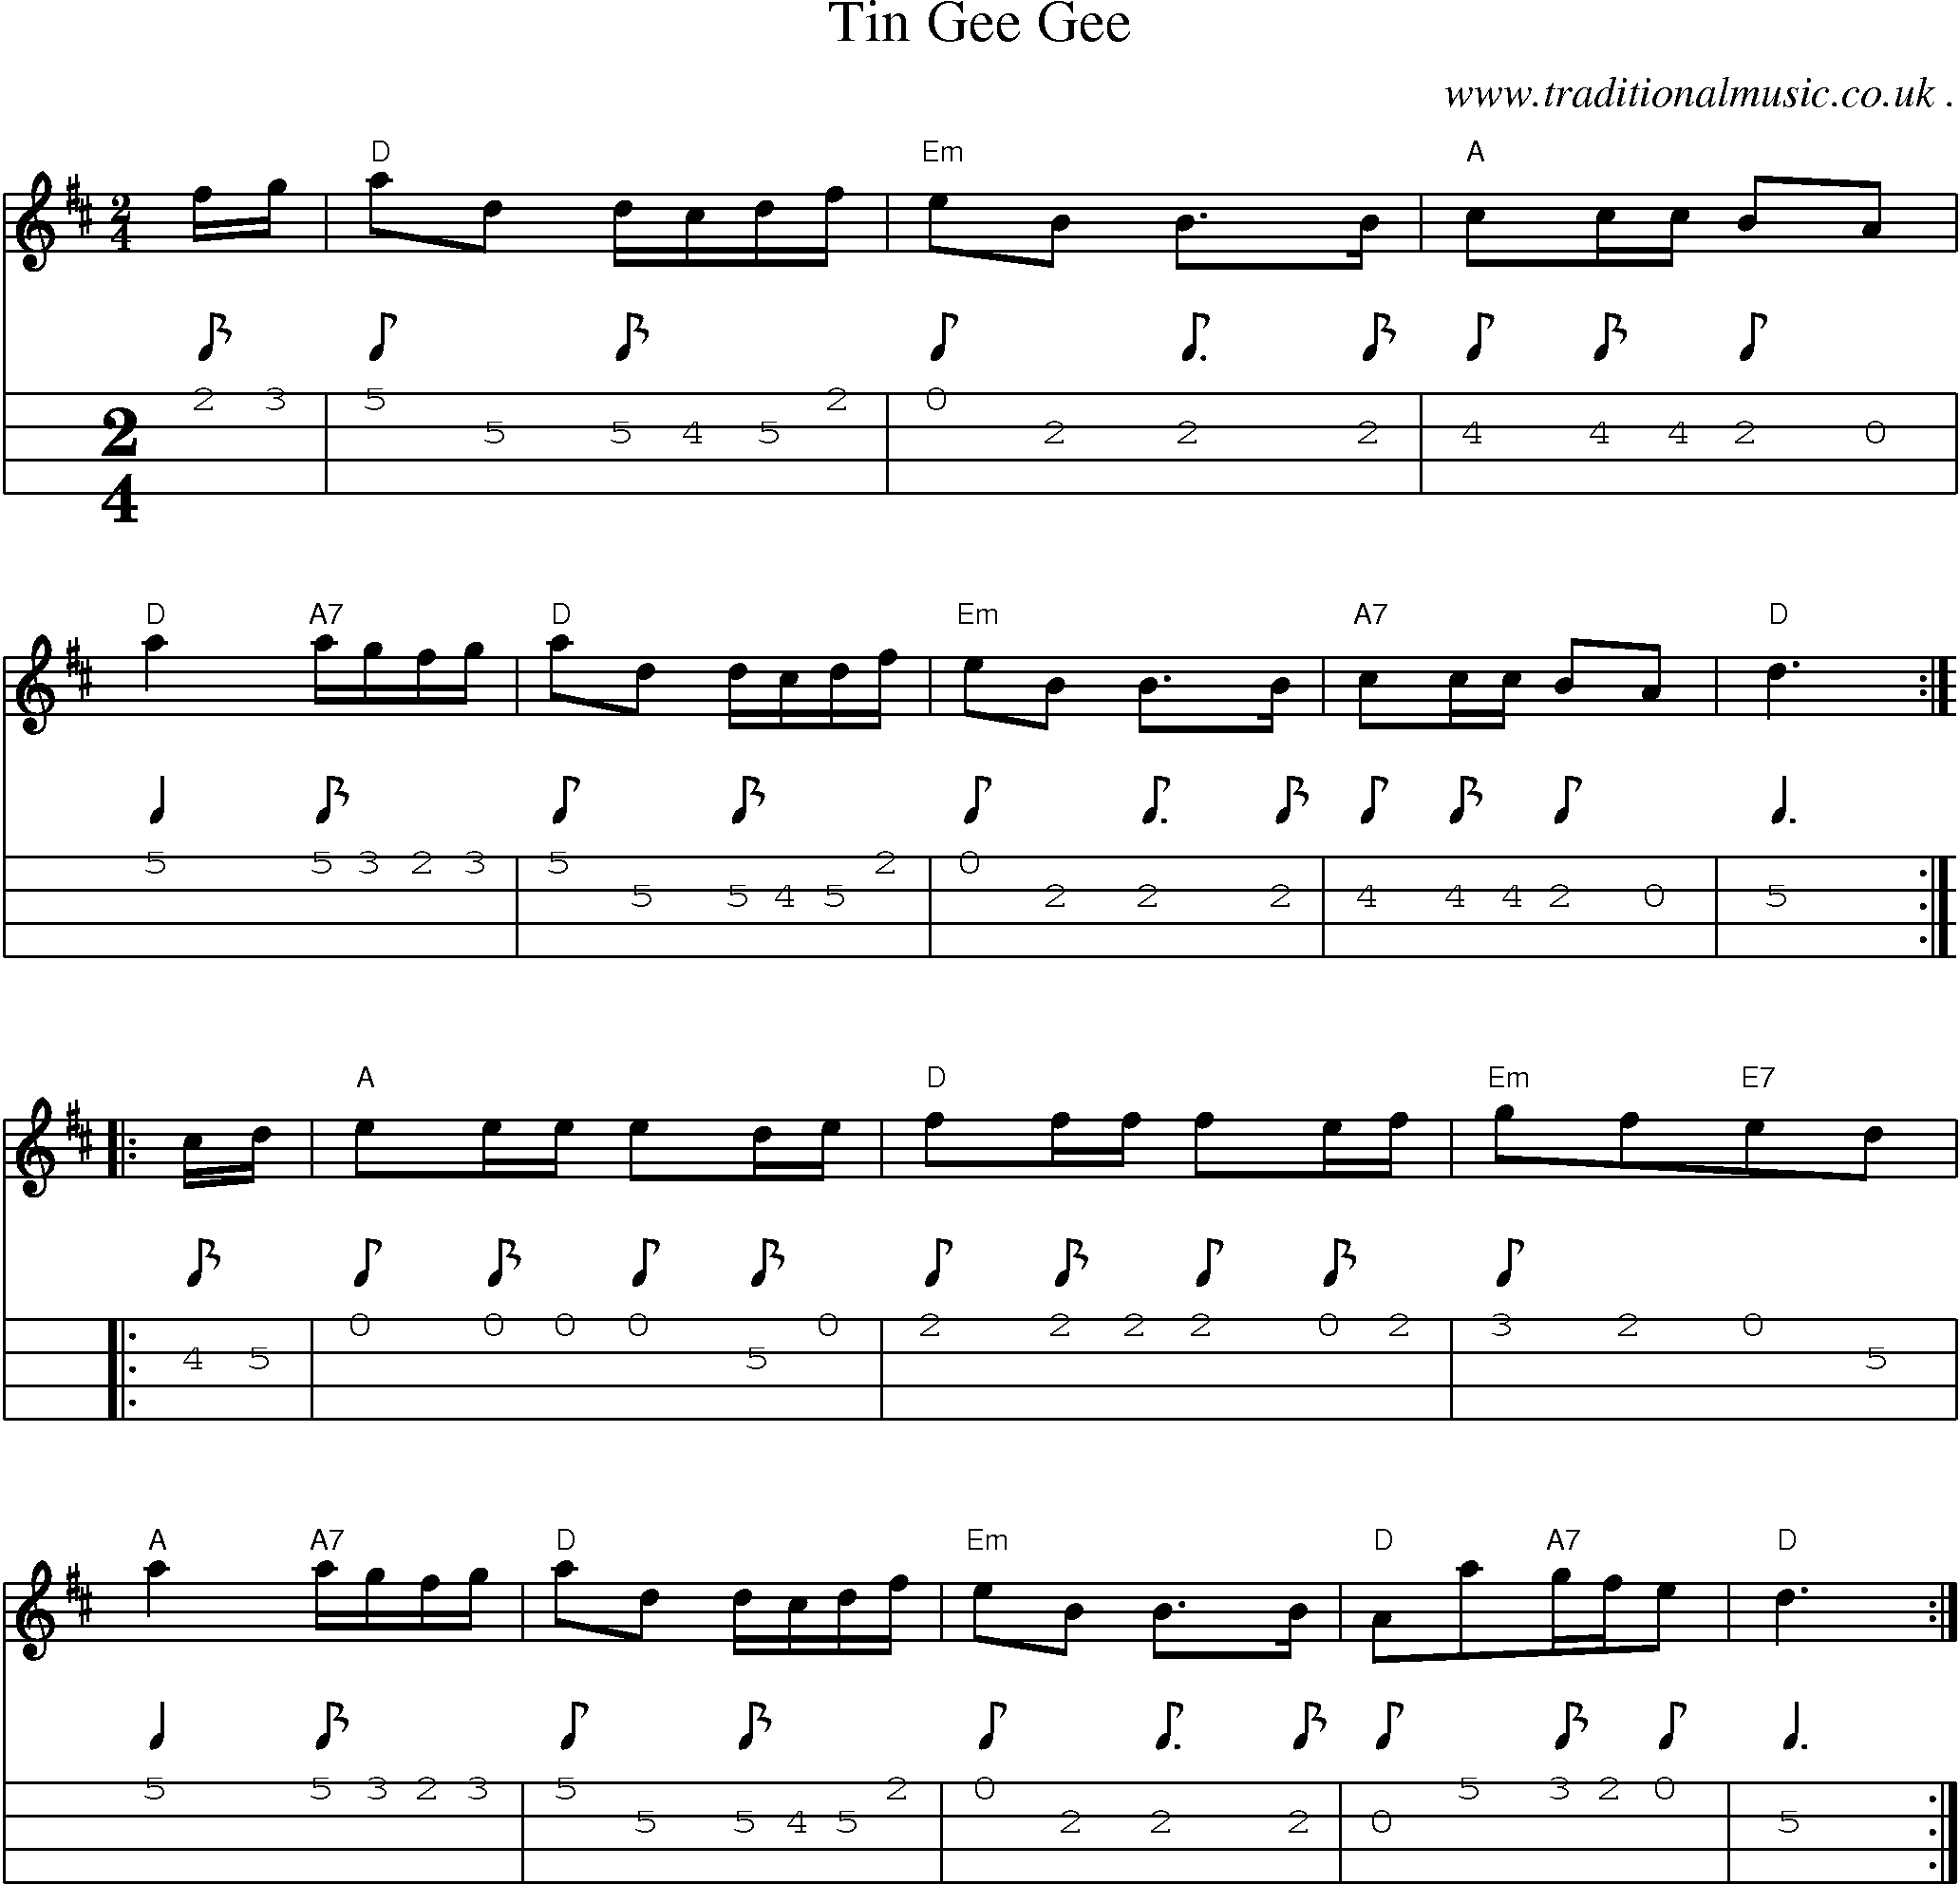 Sheet-Music and Mandolin Tabs for Tin Gee Gee